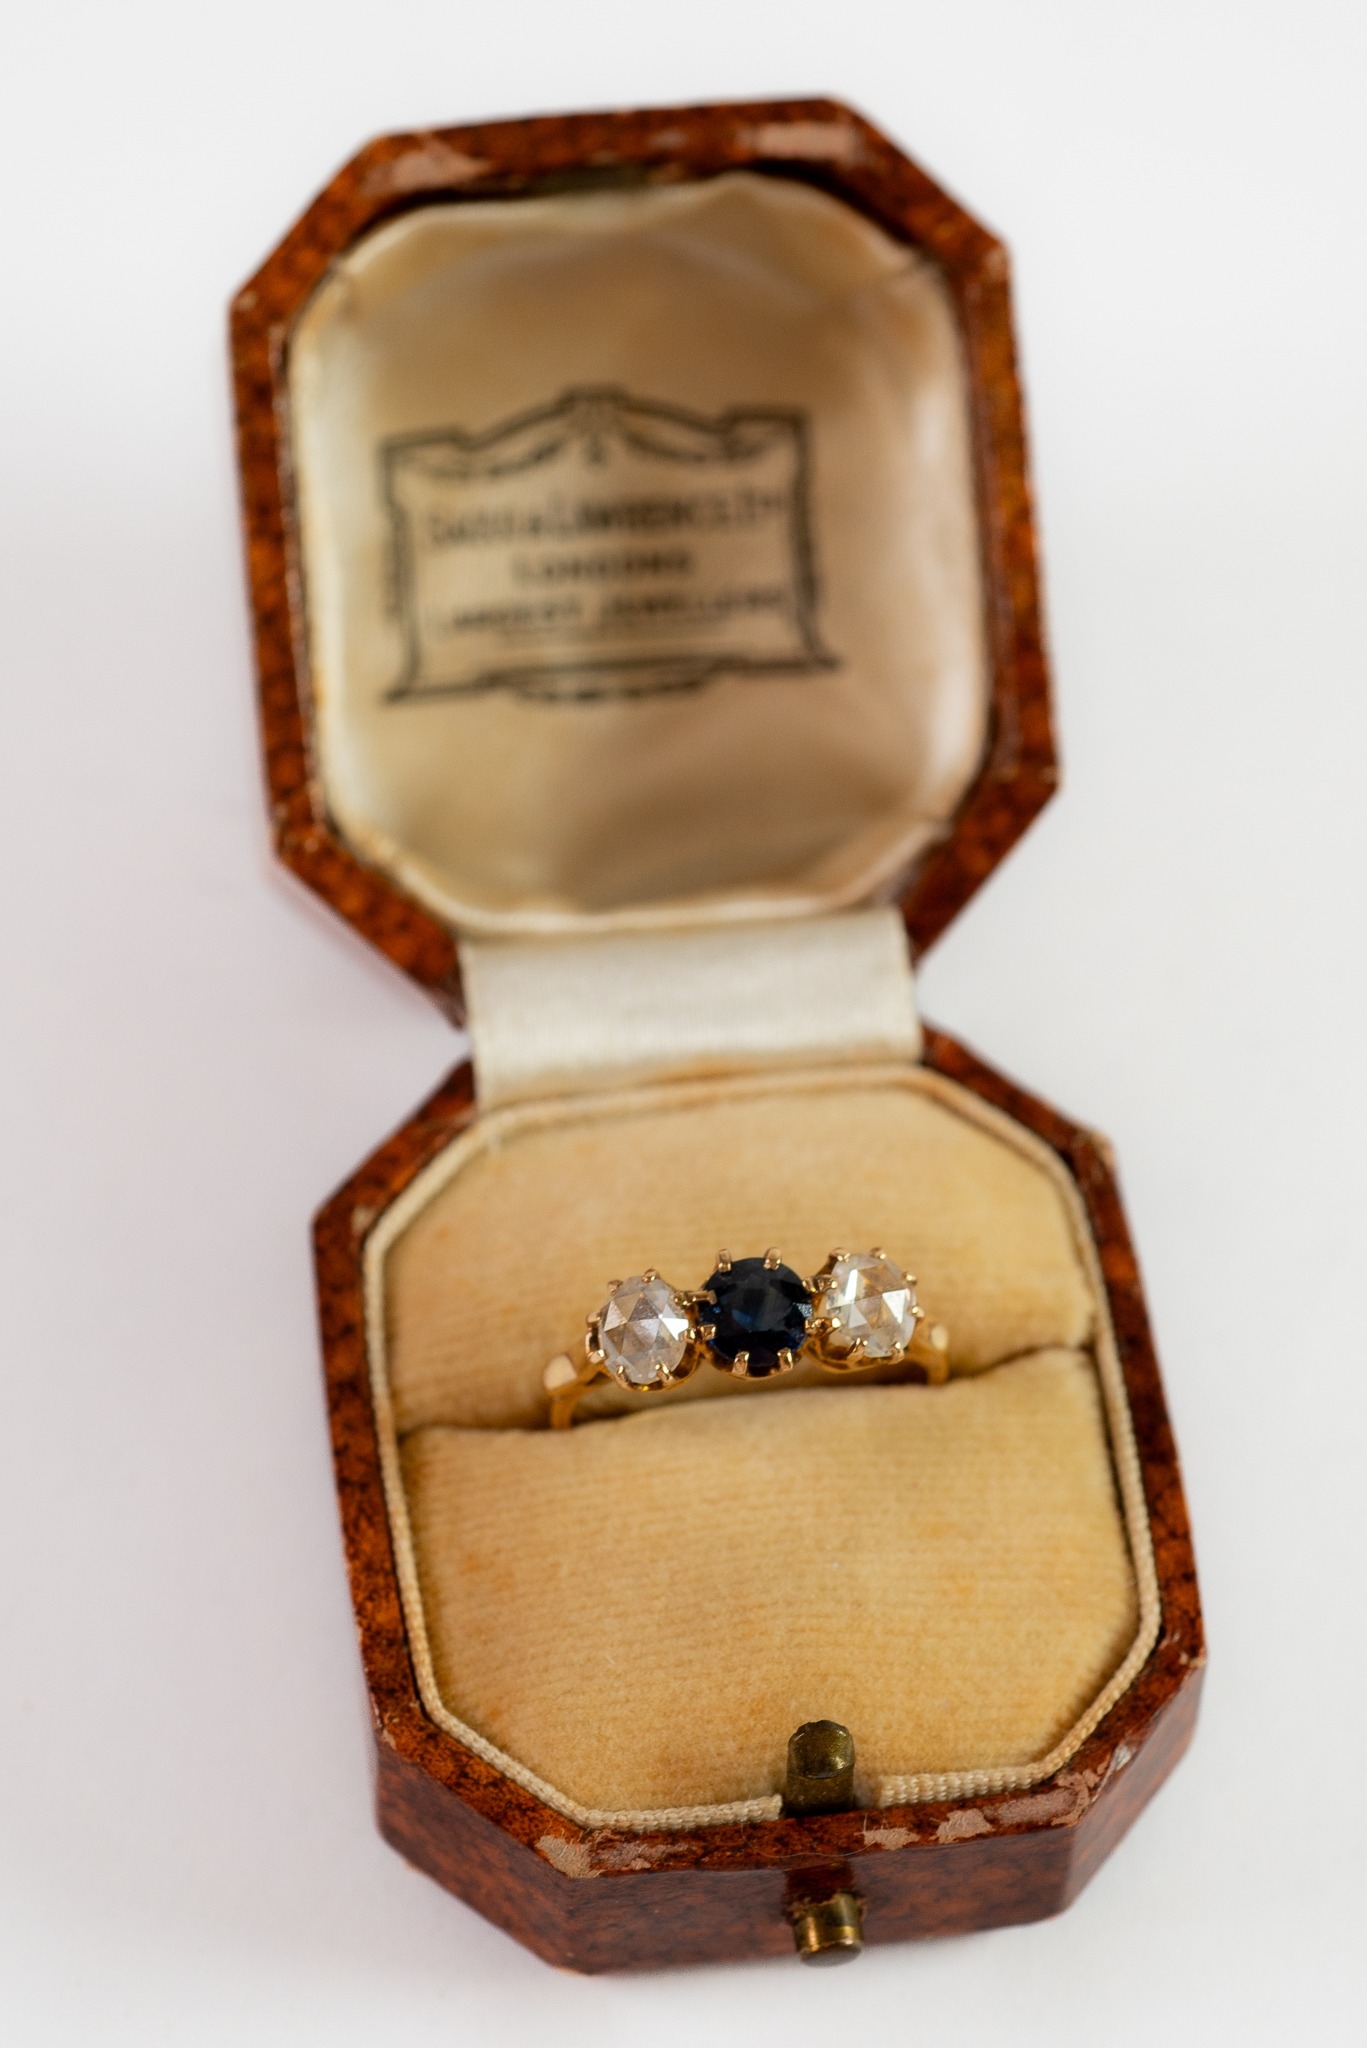 GOLD COLOUR METAL (no carat mark) RING SET WITH A SAPPHIRE BETWEEN TWO ROSE-CUT DIAMONDS, 2.6 gms